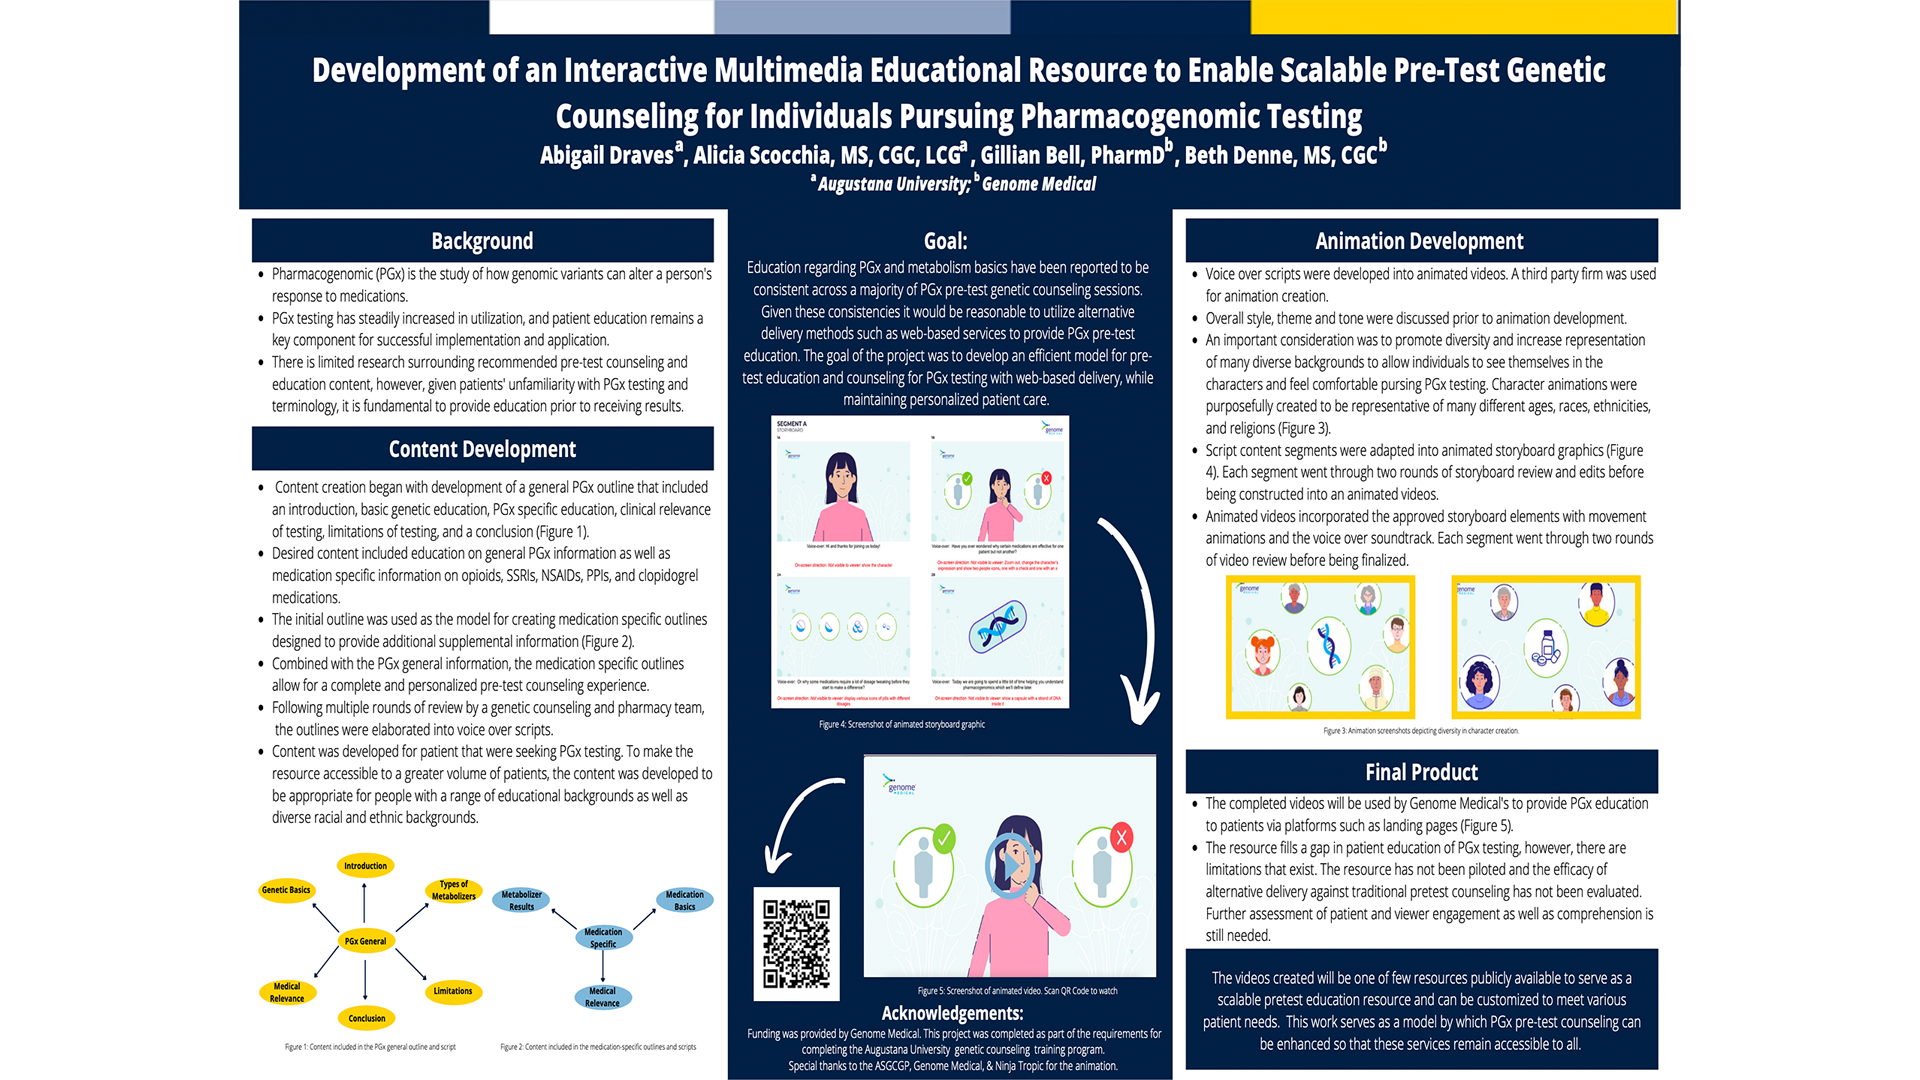 Development of an Interactive Multimedia Education Poster